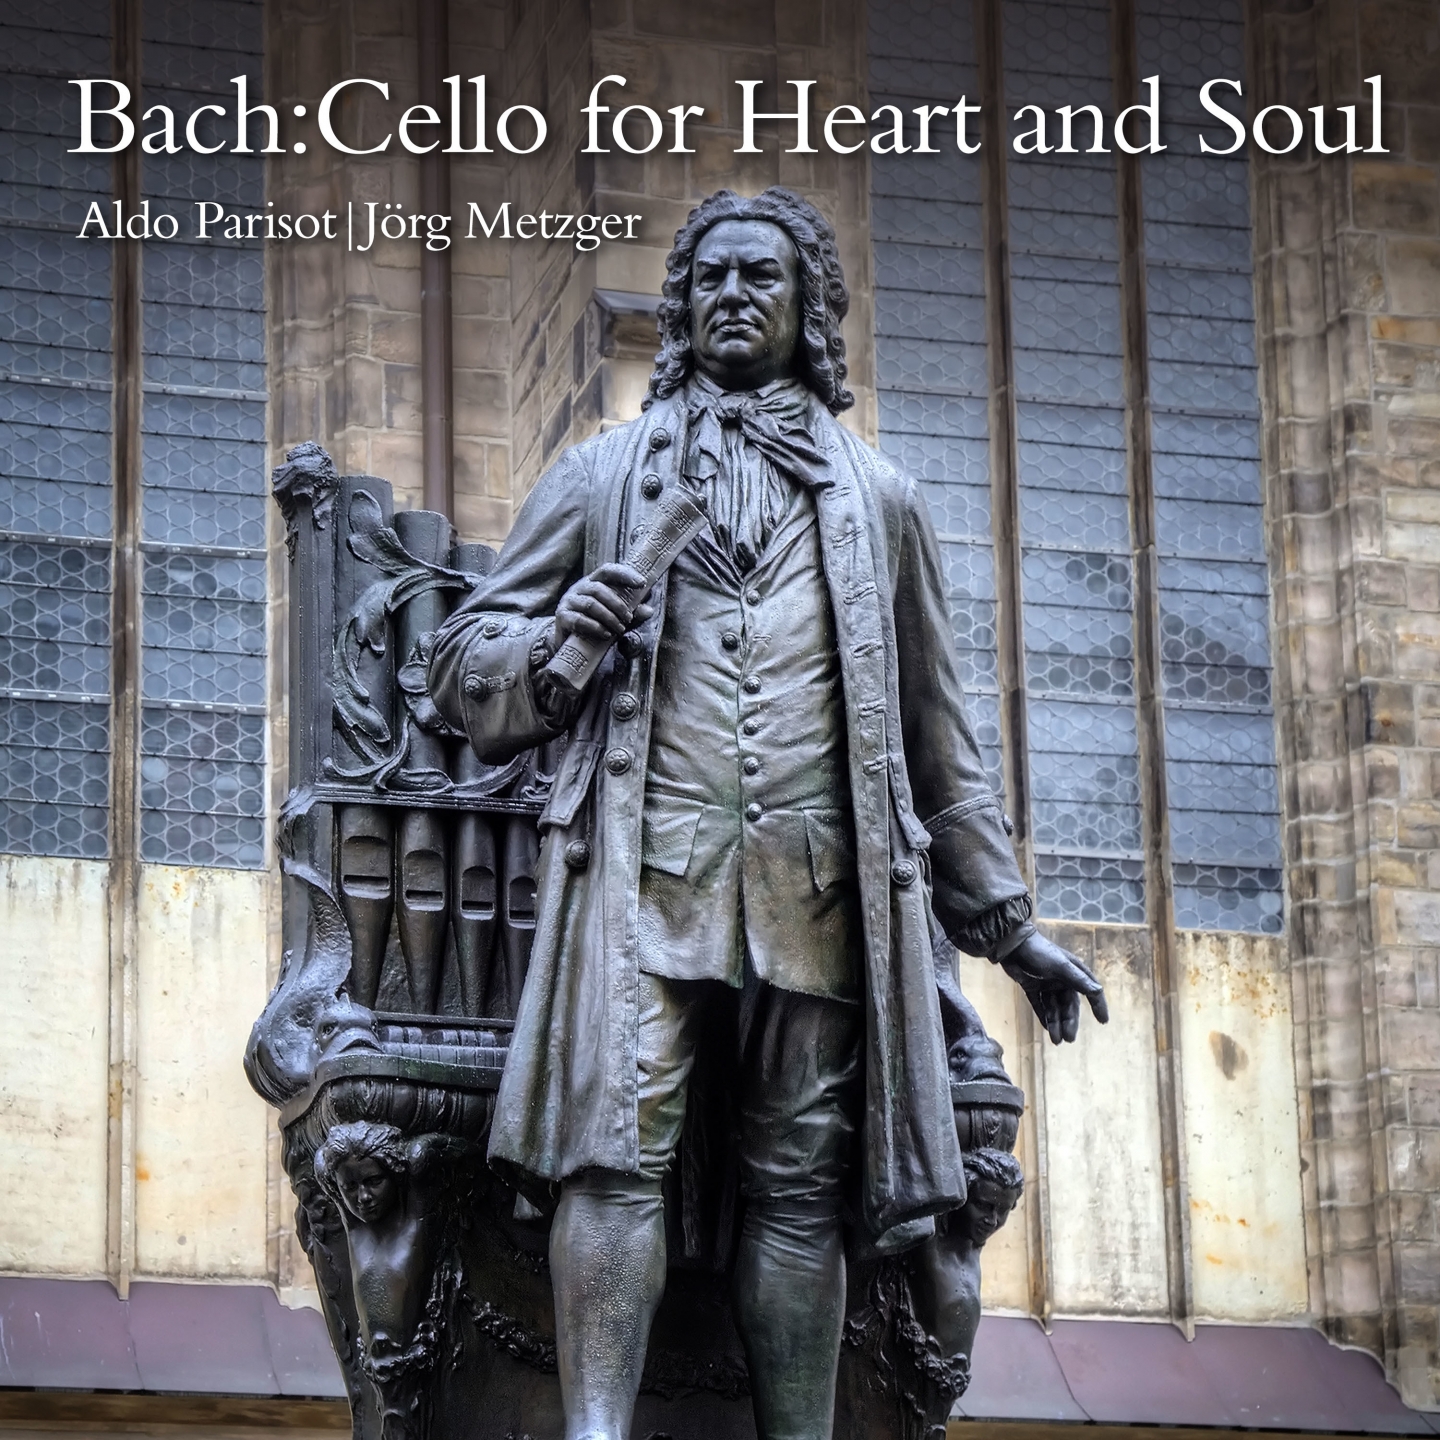 Bach: Cello for Heart and Soul